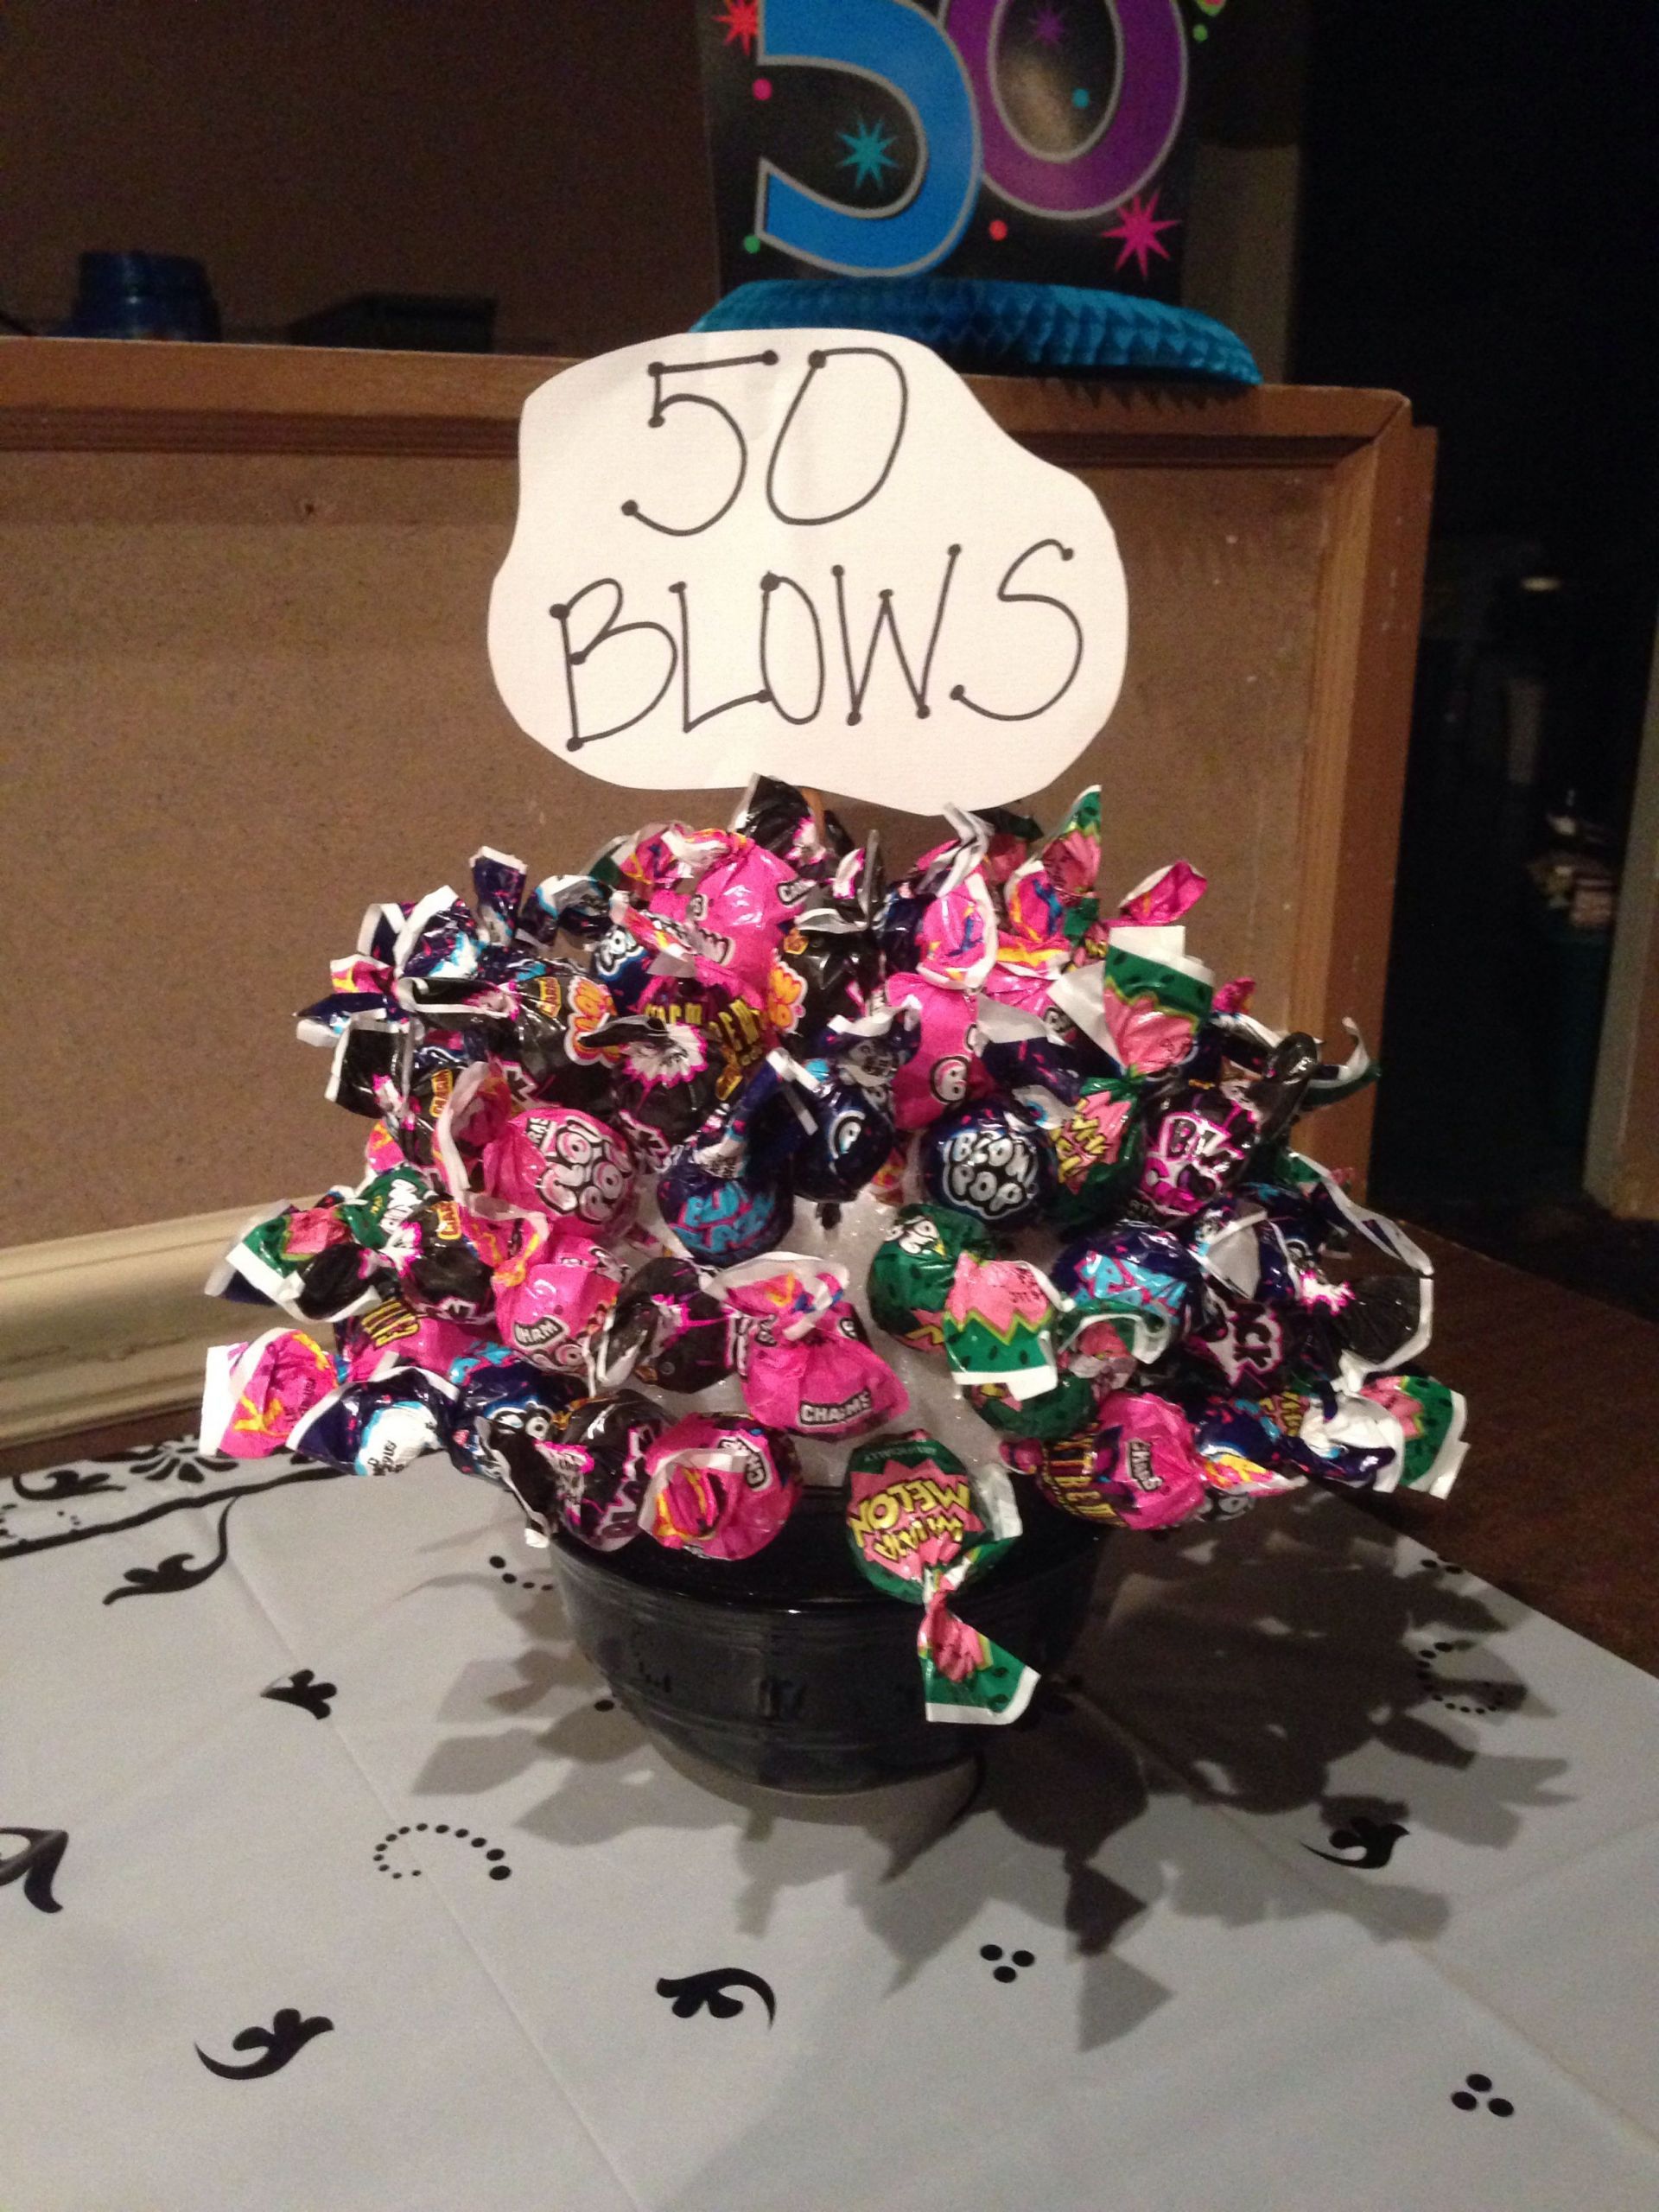 50Th Birthday Party Gift Ideas
 50 Blows bouquet for a 50th birthday party t